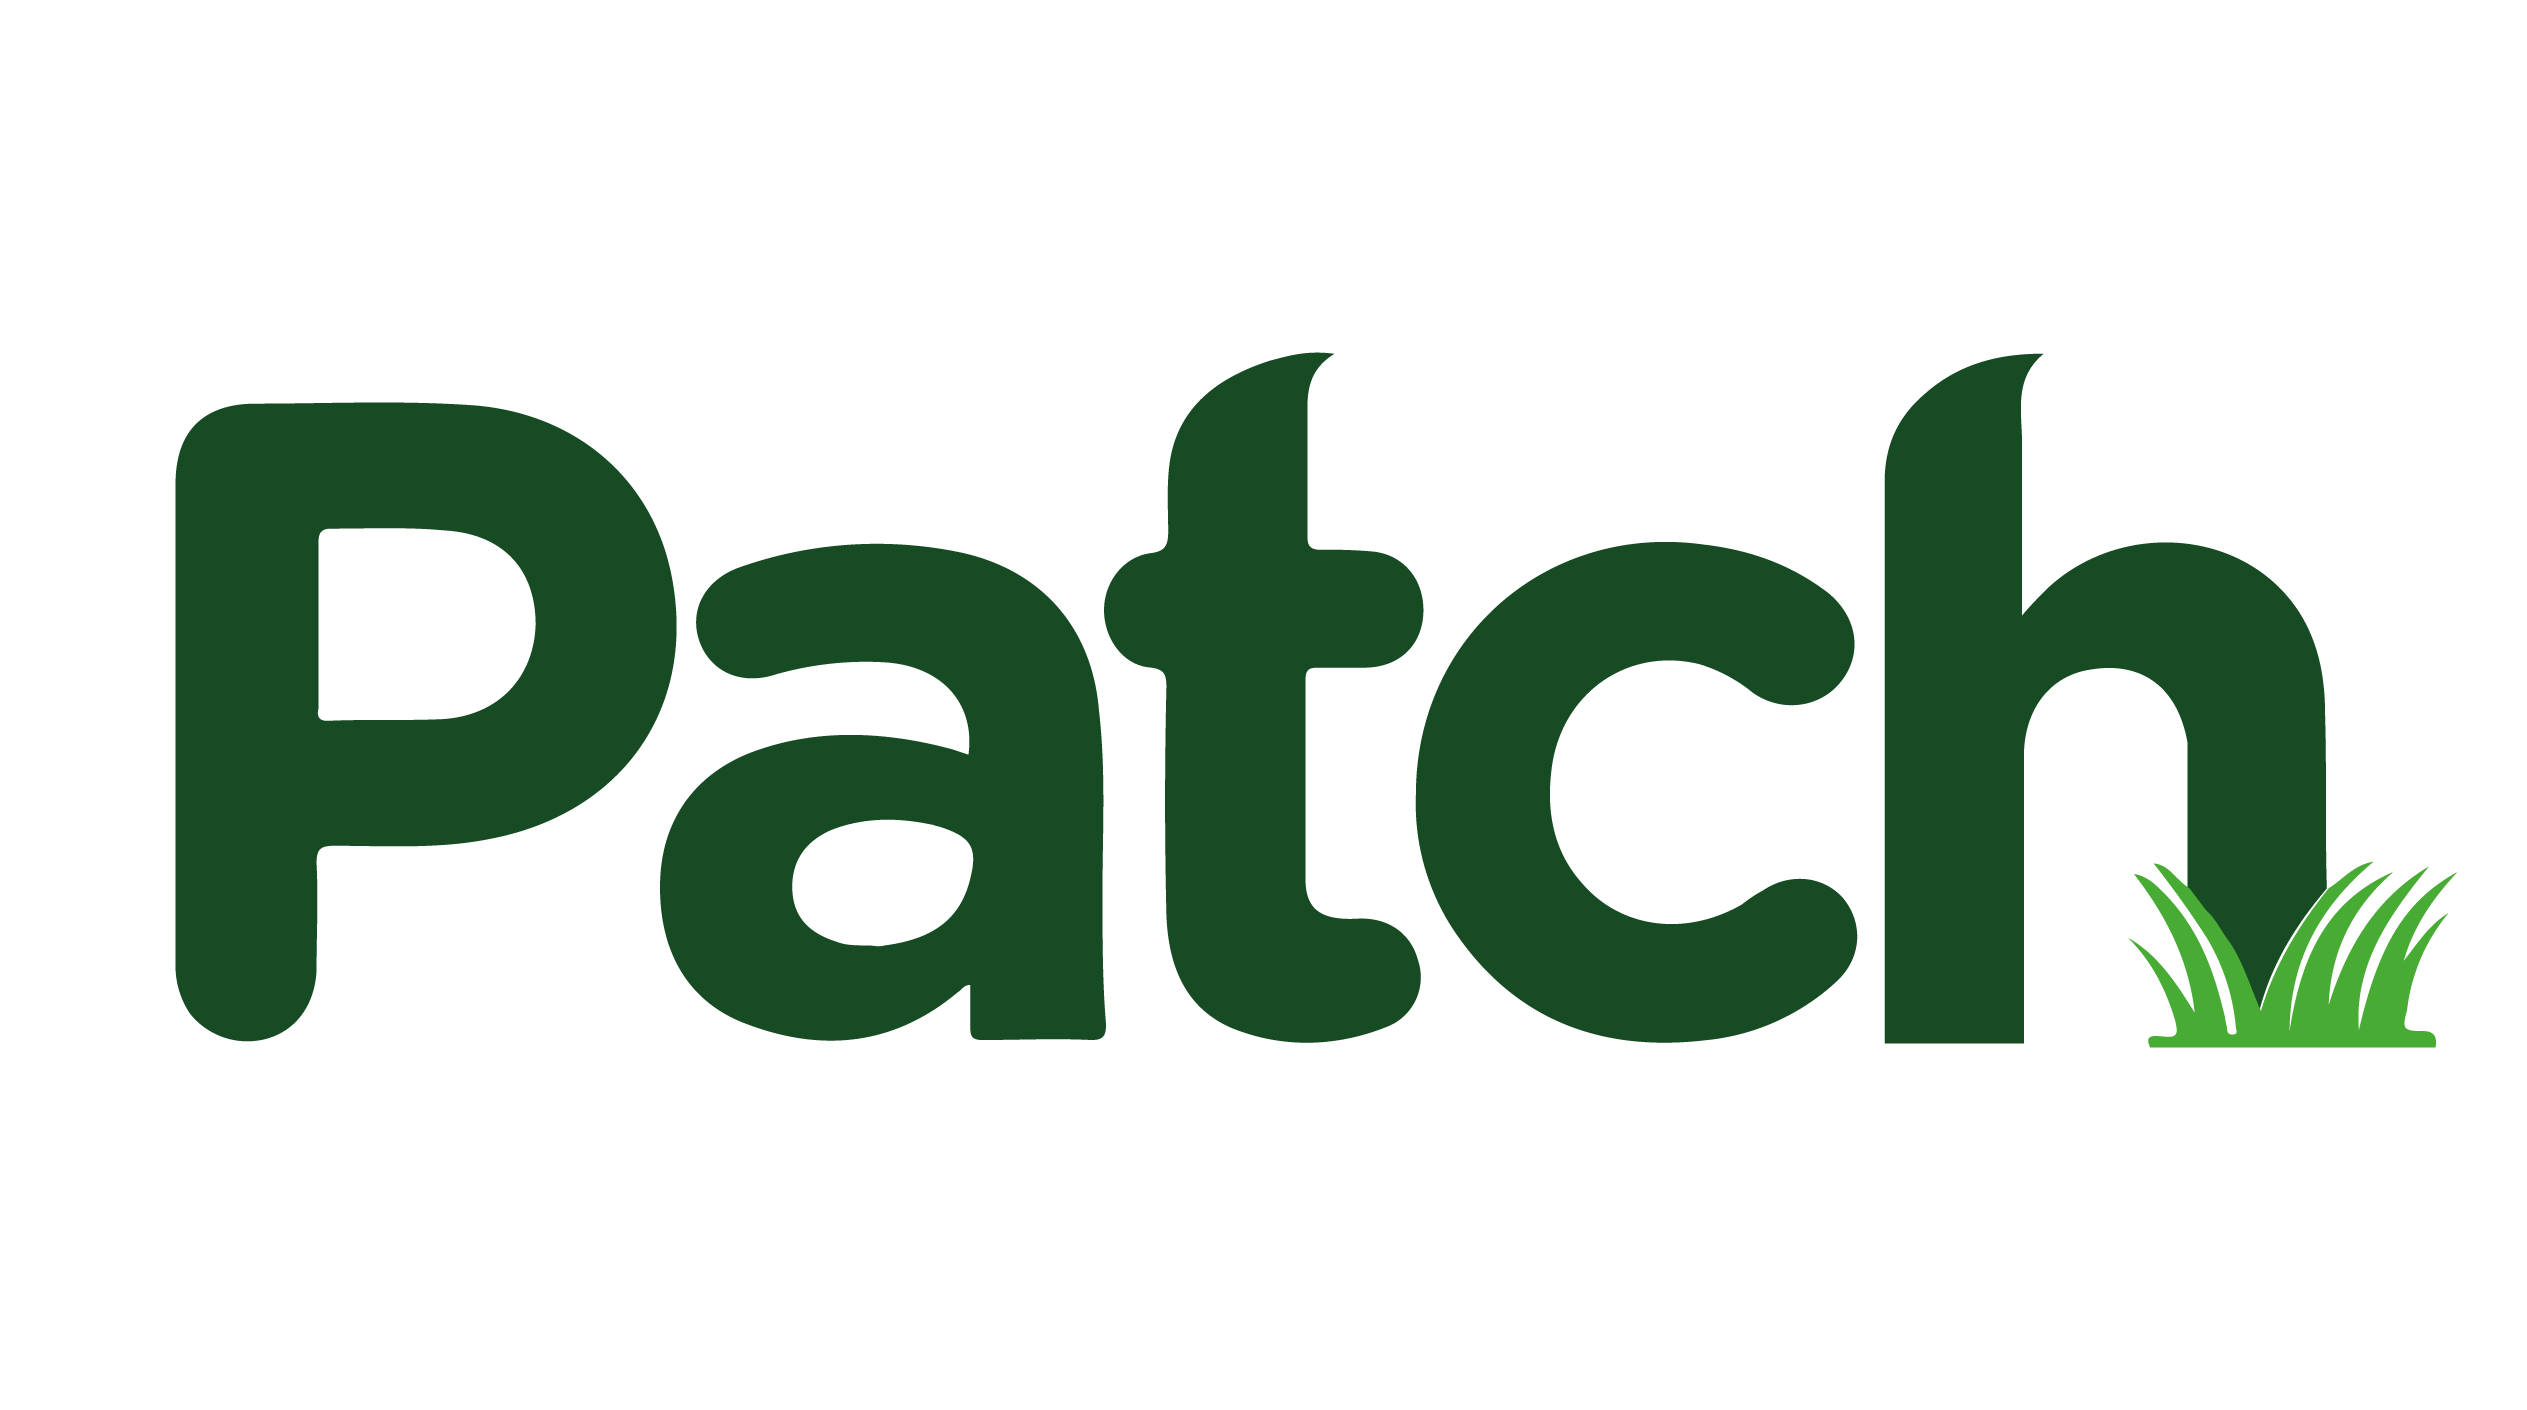 a green patch logo on a black background.